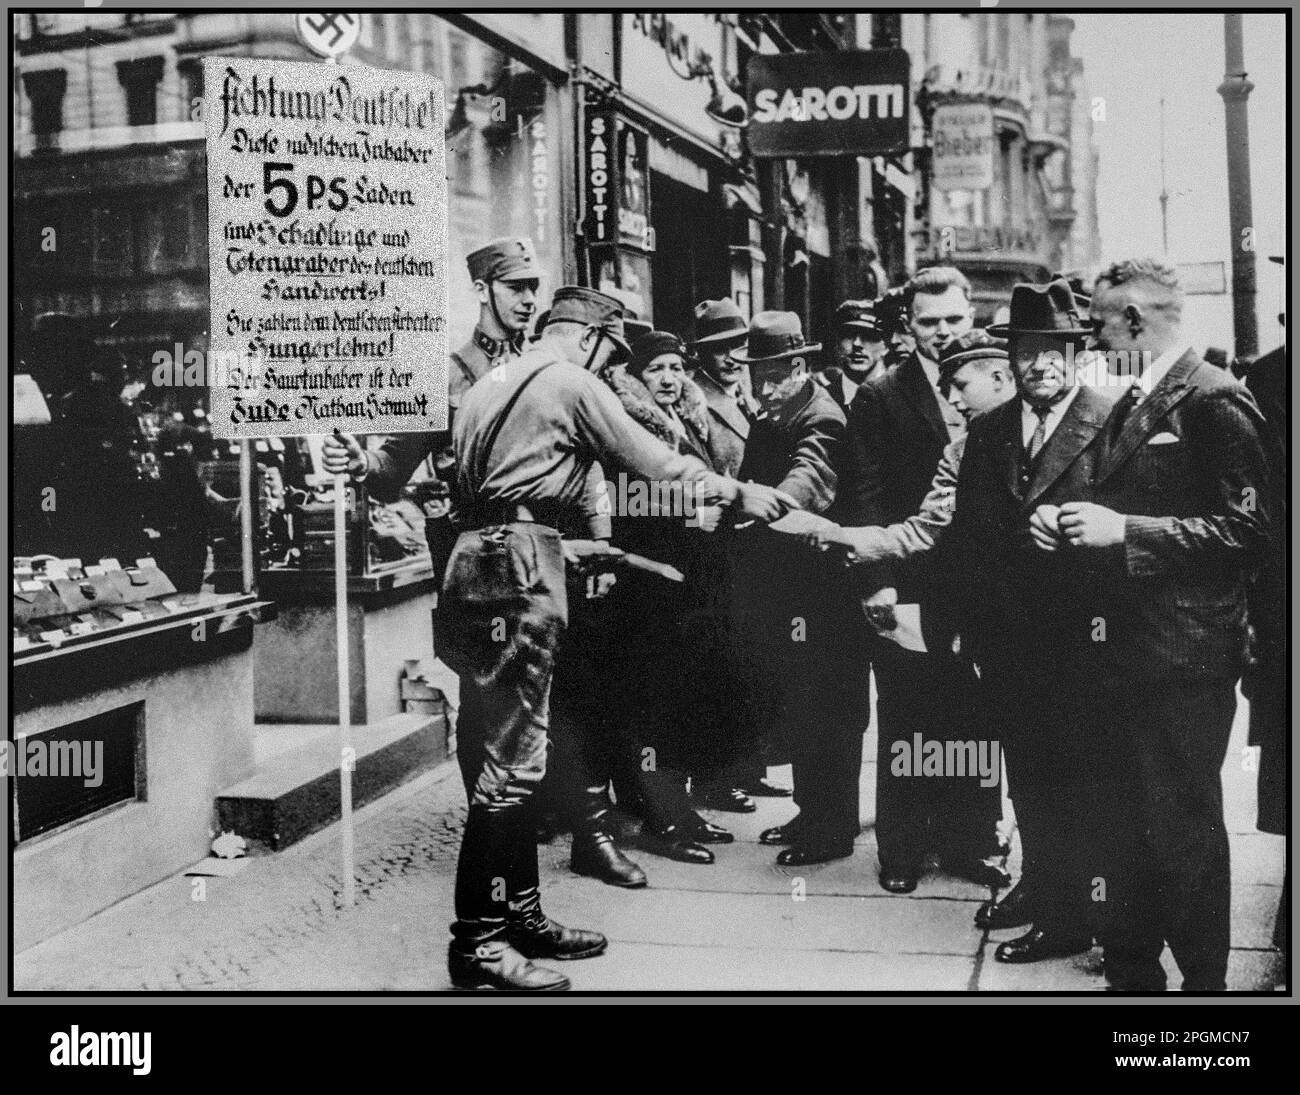 Nazi Germany 1930s Anti semitism anti Jewish racist SA pickets distribute boycott pamphlets to German pedestrians. The sign held by one of them reads: 'Attention Germans. These Jewish owners of [five and dime] stores are the parasites and gravediggers of German craftsmen. They pay starvation wages to German workers. The shop owner is the Jew, Nathan Schmidt.' Antisemitism in Nazi Germany Stock Photo